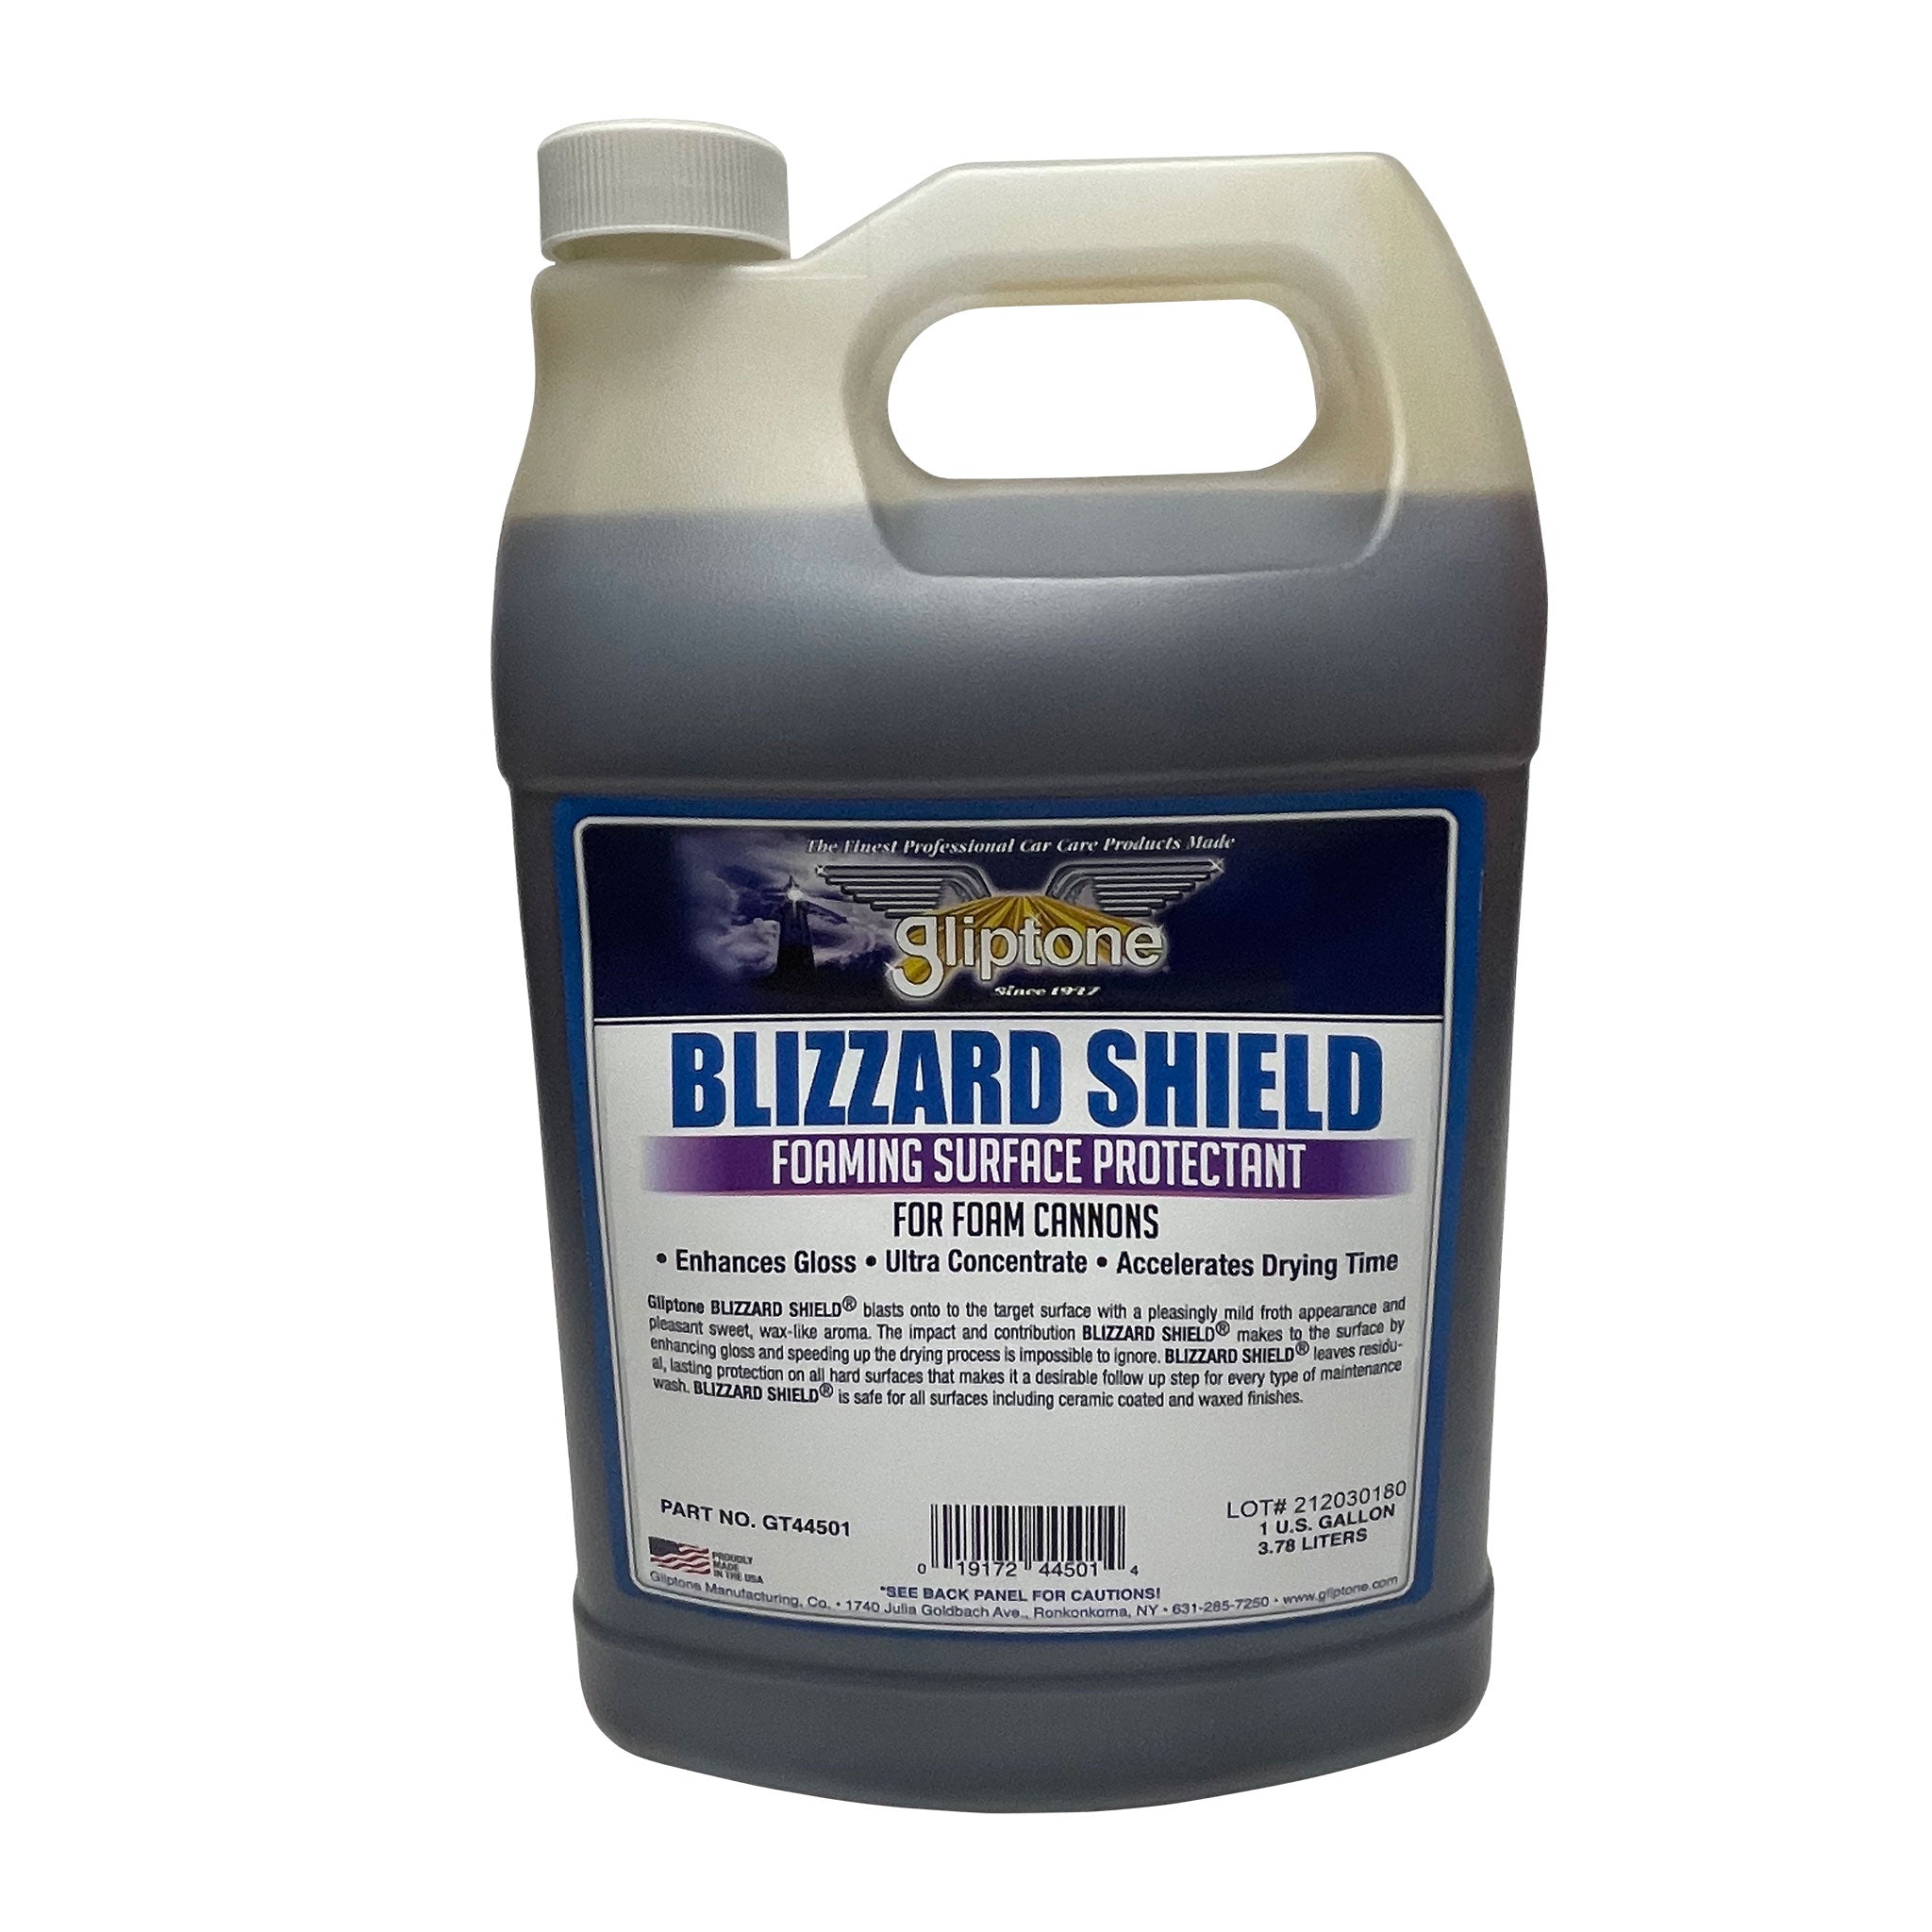 Blizzard Shield Foaming surface Protectant